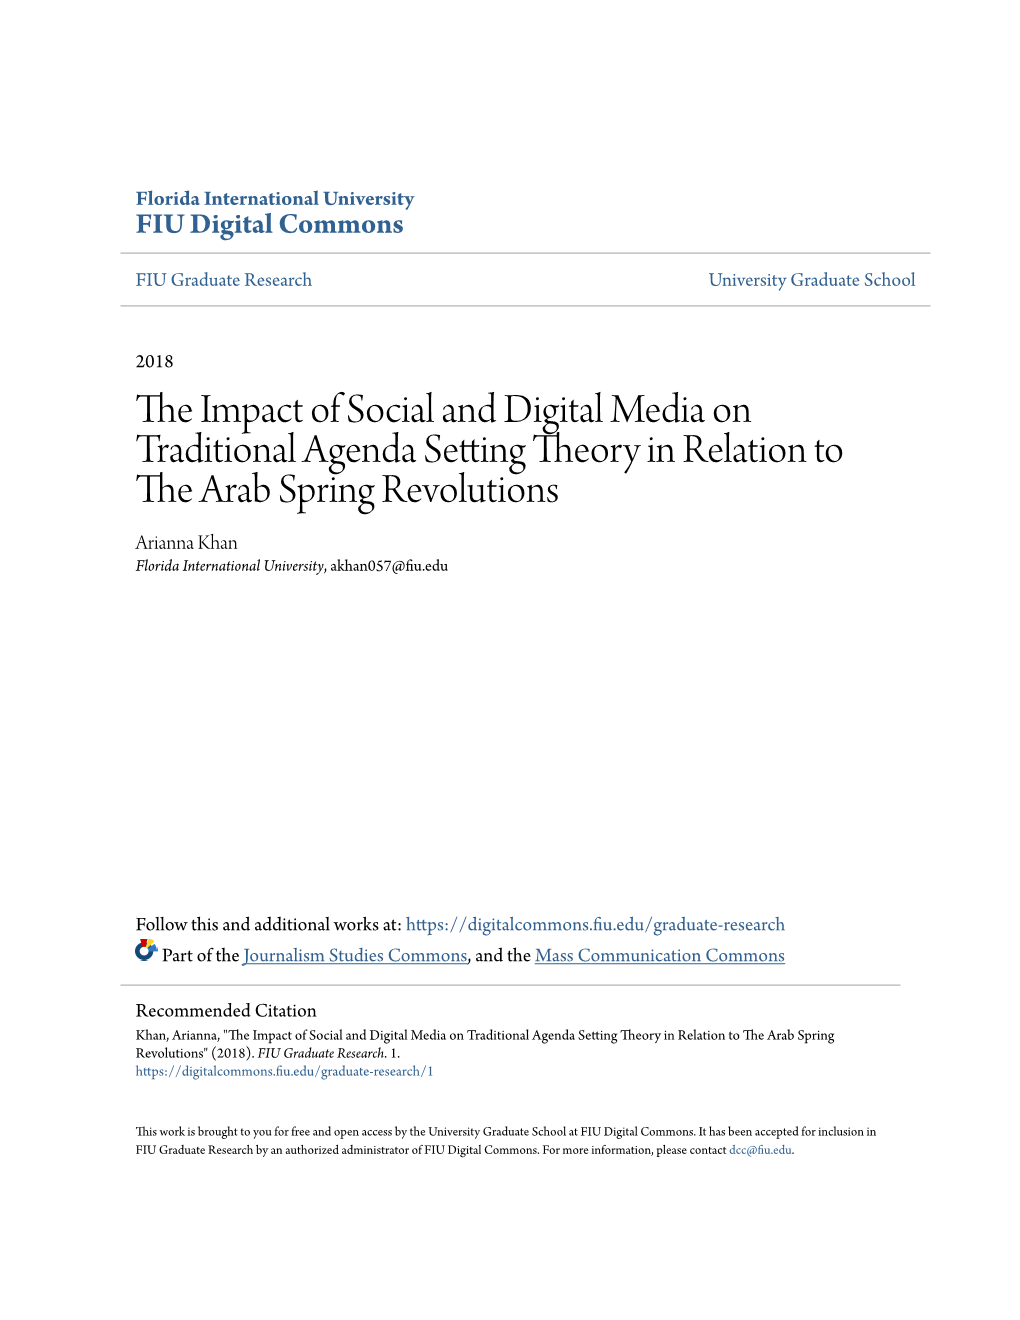 The Impact of Social and Digital Media on Traditional Agenda Setting